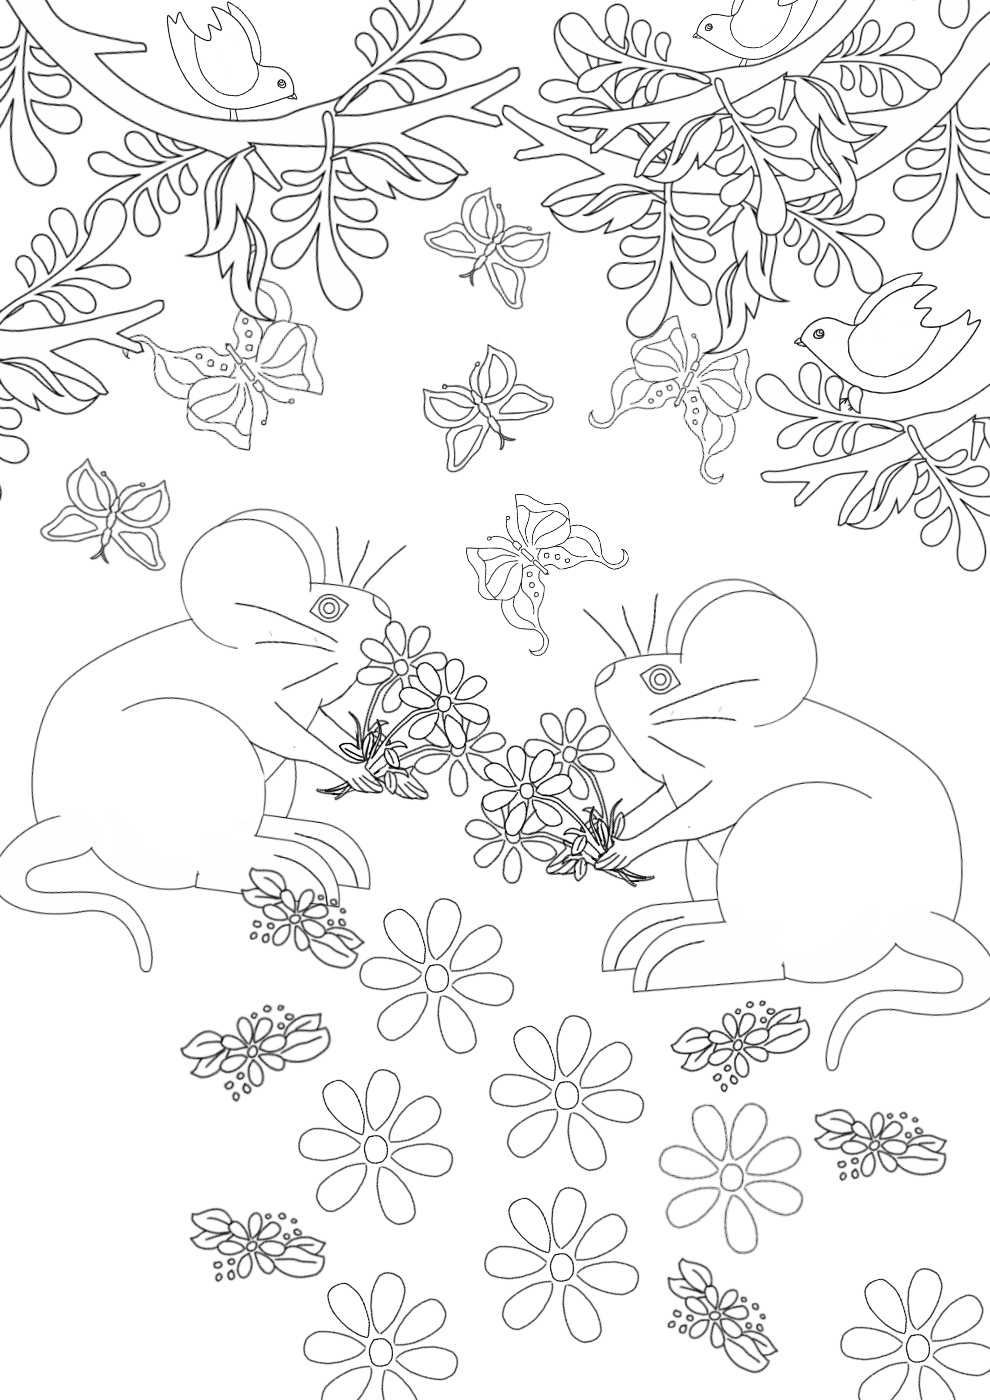 Field Mice in the Forest Coloring Page